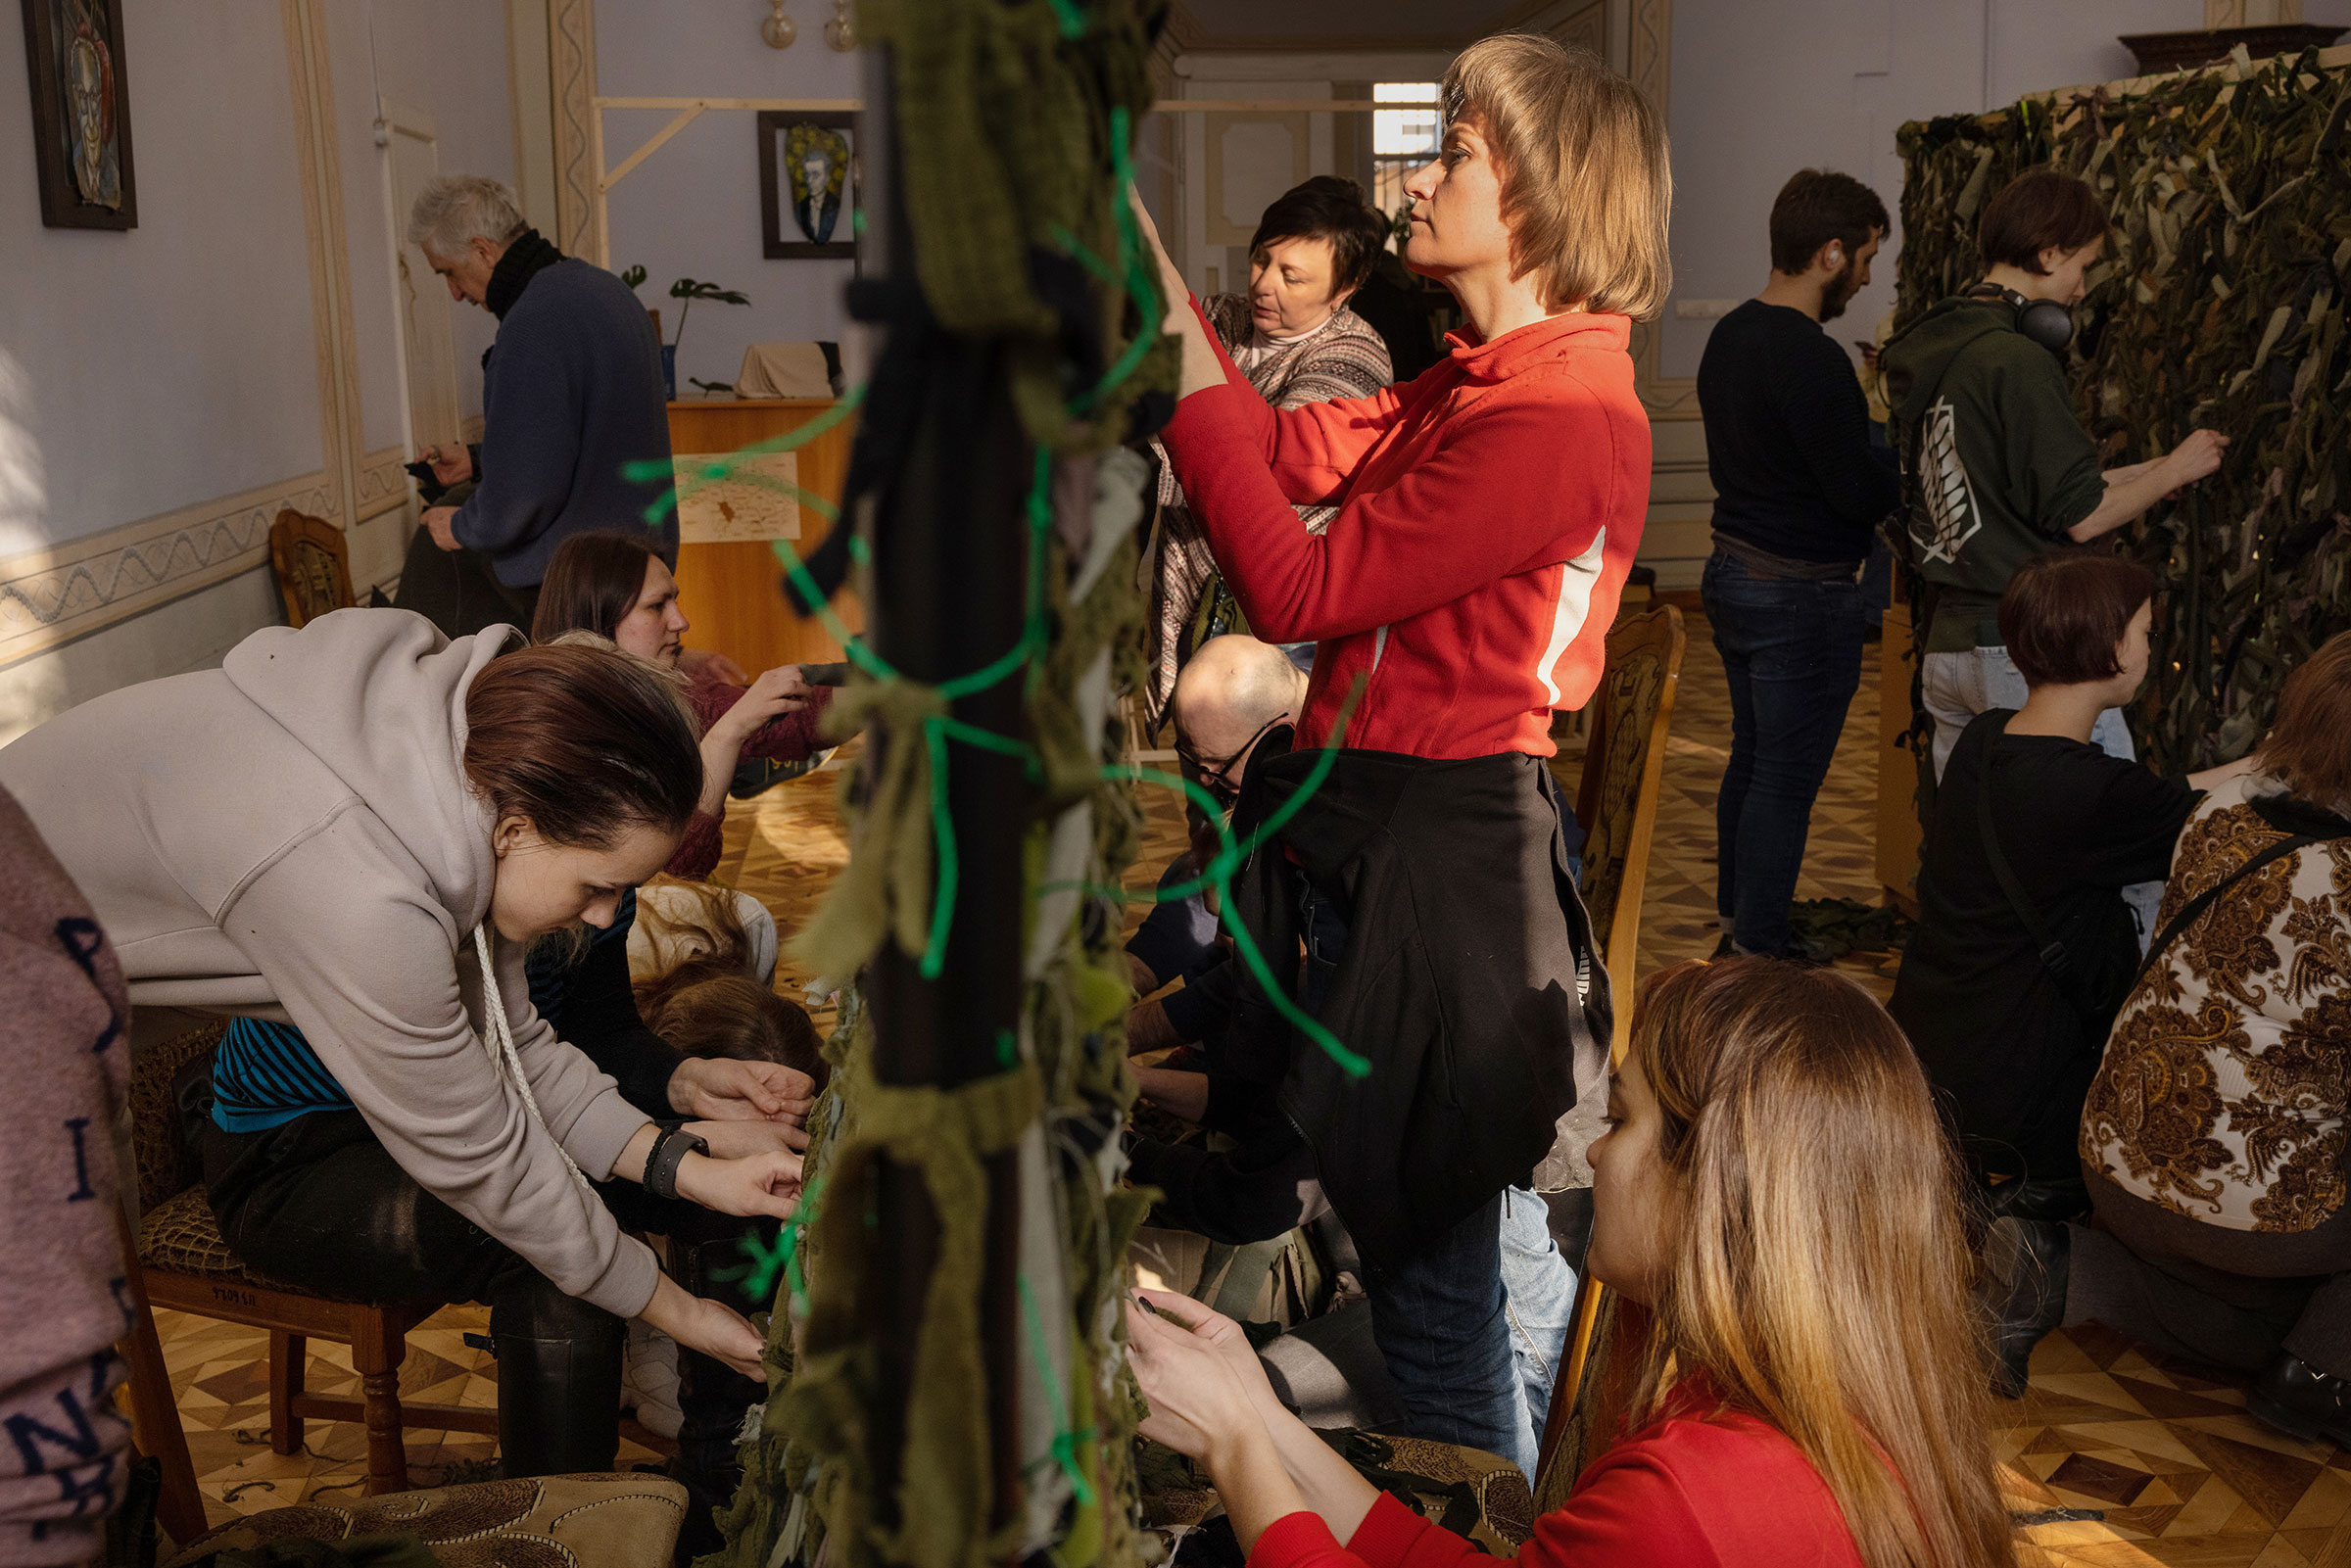 Volunteers at a library in central Lviv, Ukraine, weave camouflage nets to send to the soldiers on the front lines on March 7. (Natalie Keyssar for TIME)